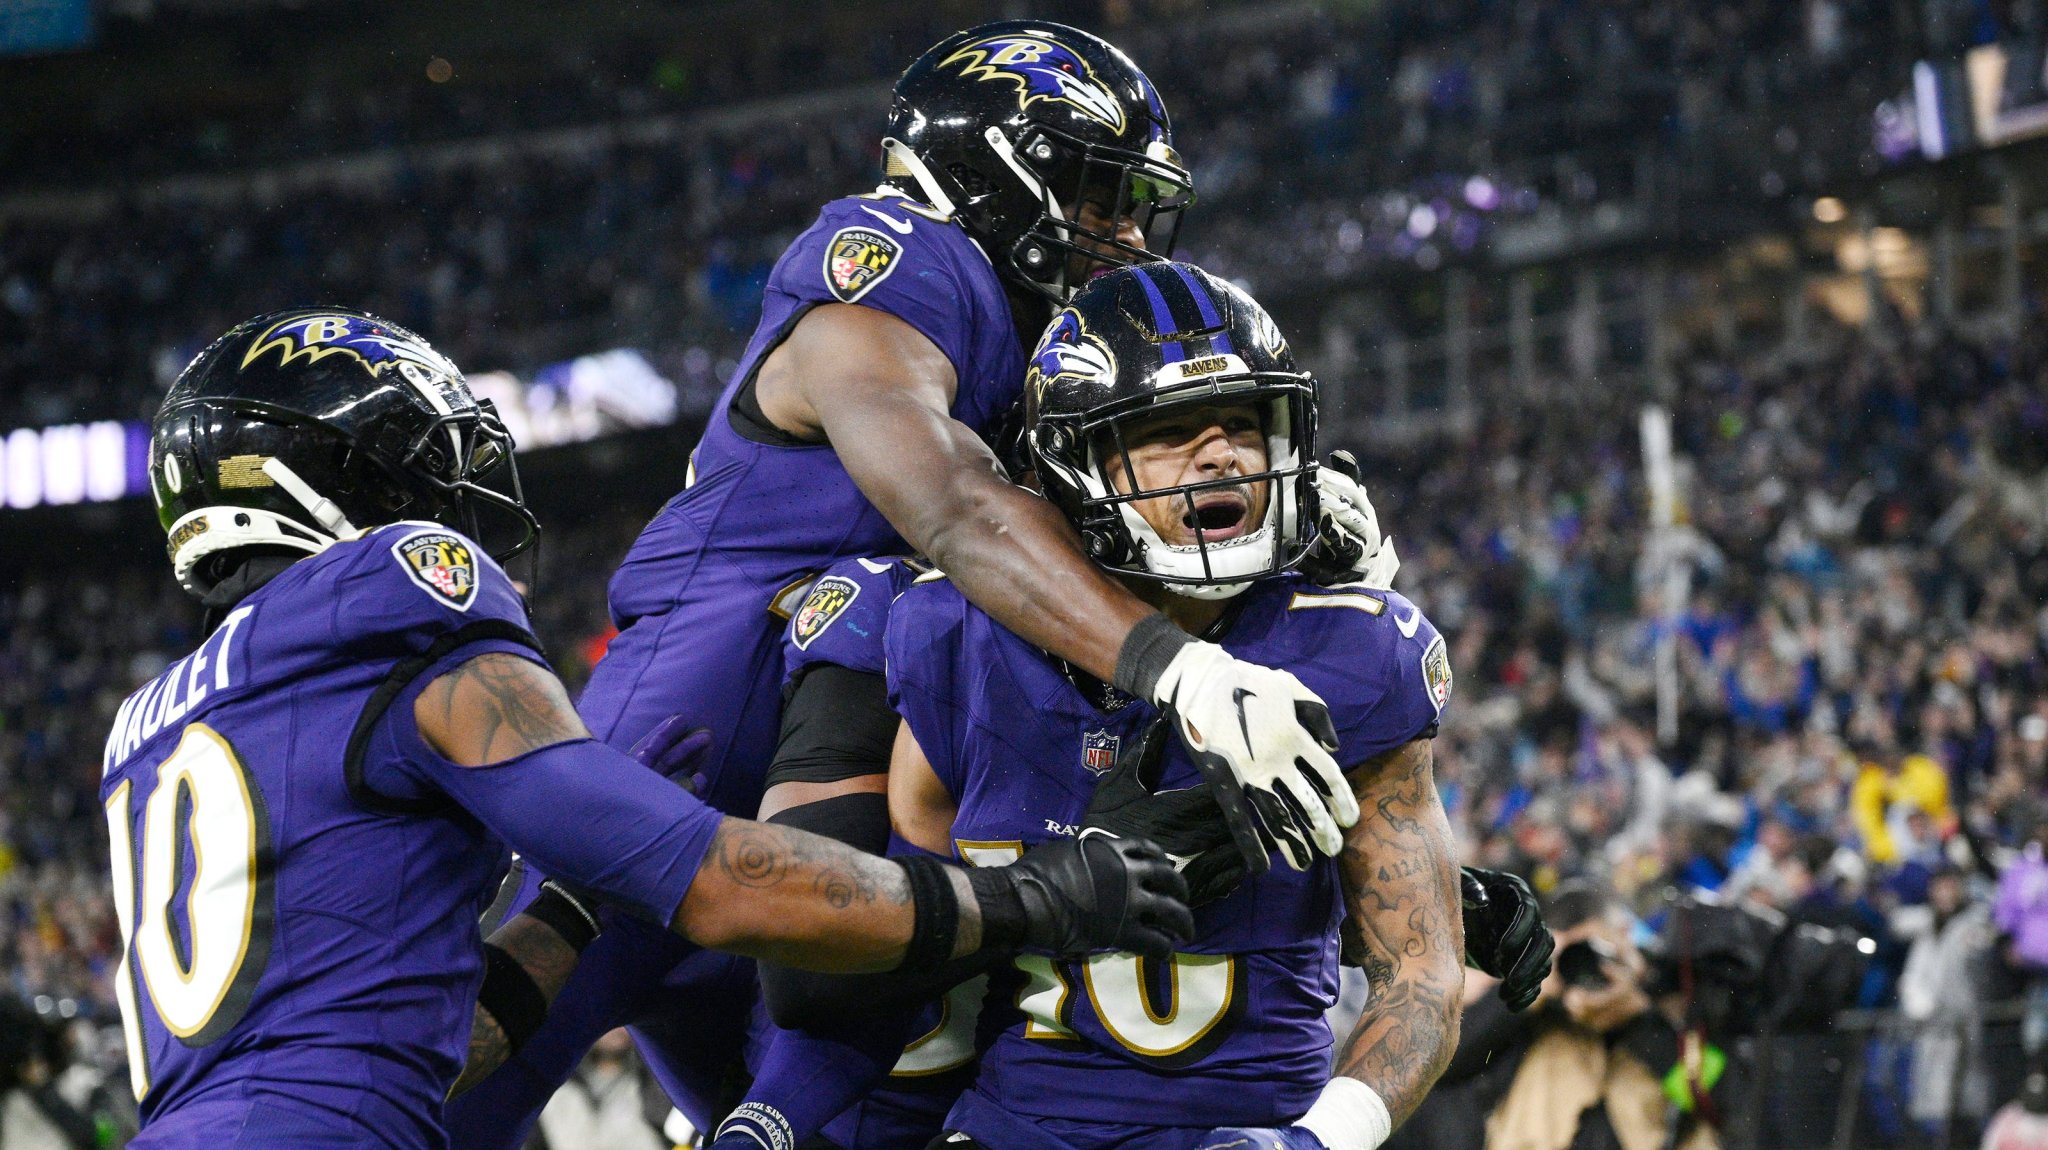 Tylan Wallace goes from little-used backup to game-winning hero with punt return TD for Ravens